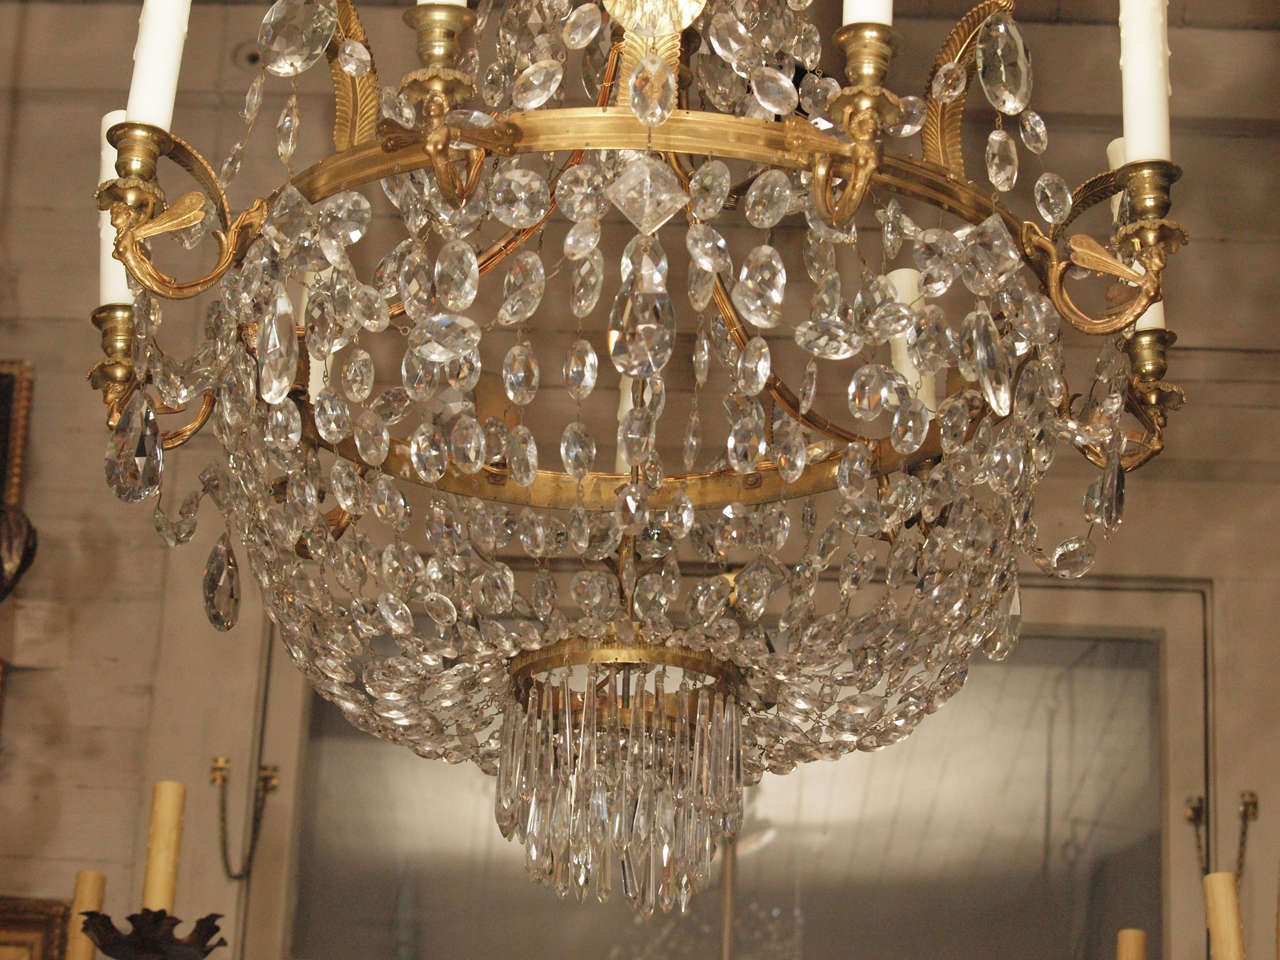 Ormolu 18th Century French Empire gilt bronze and crystal chandelier